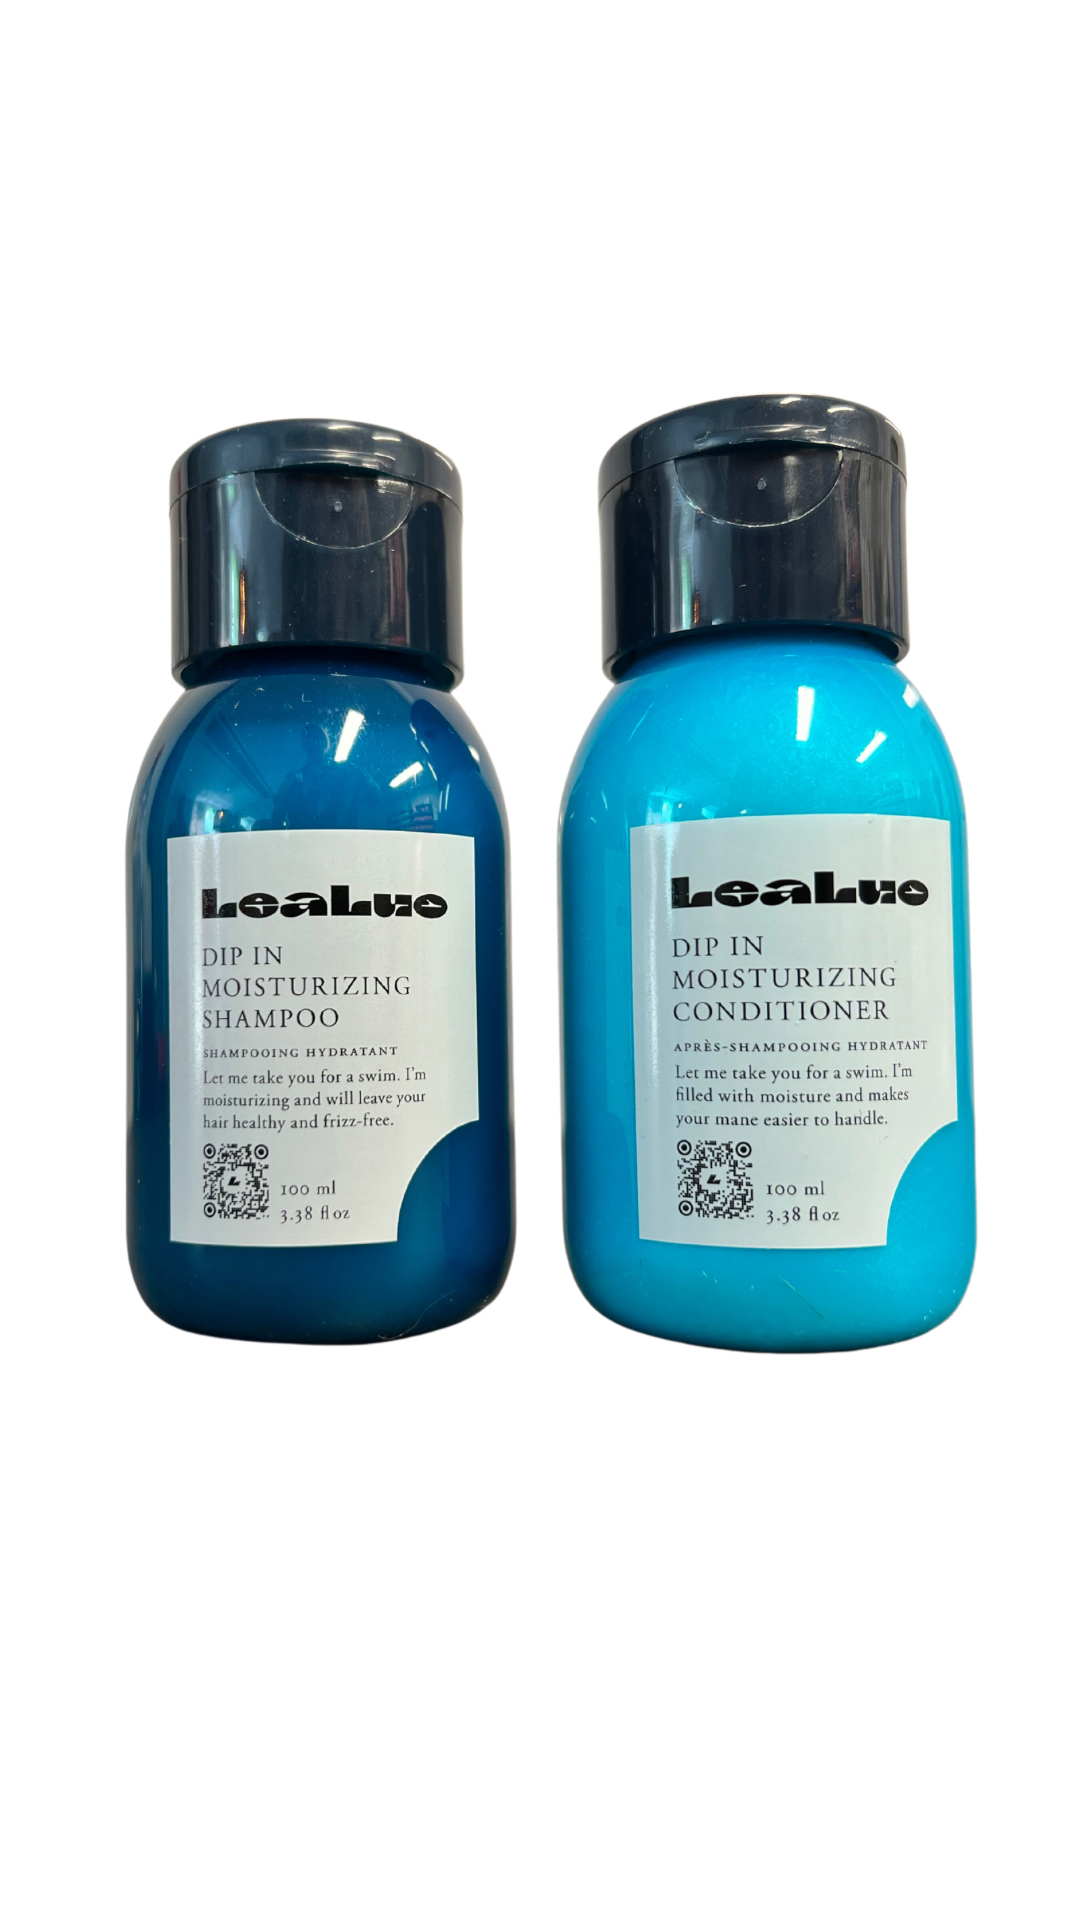 LeaLuo Dip In Moisturizing Schampoo and conditioner 100 ml x 2